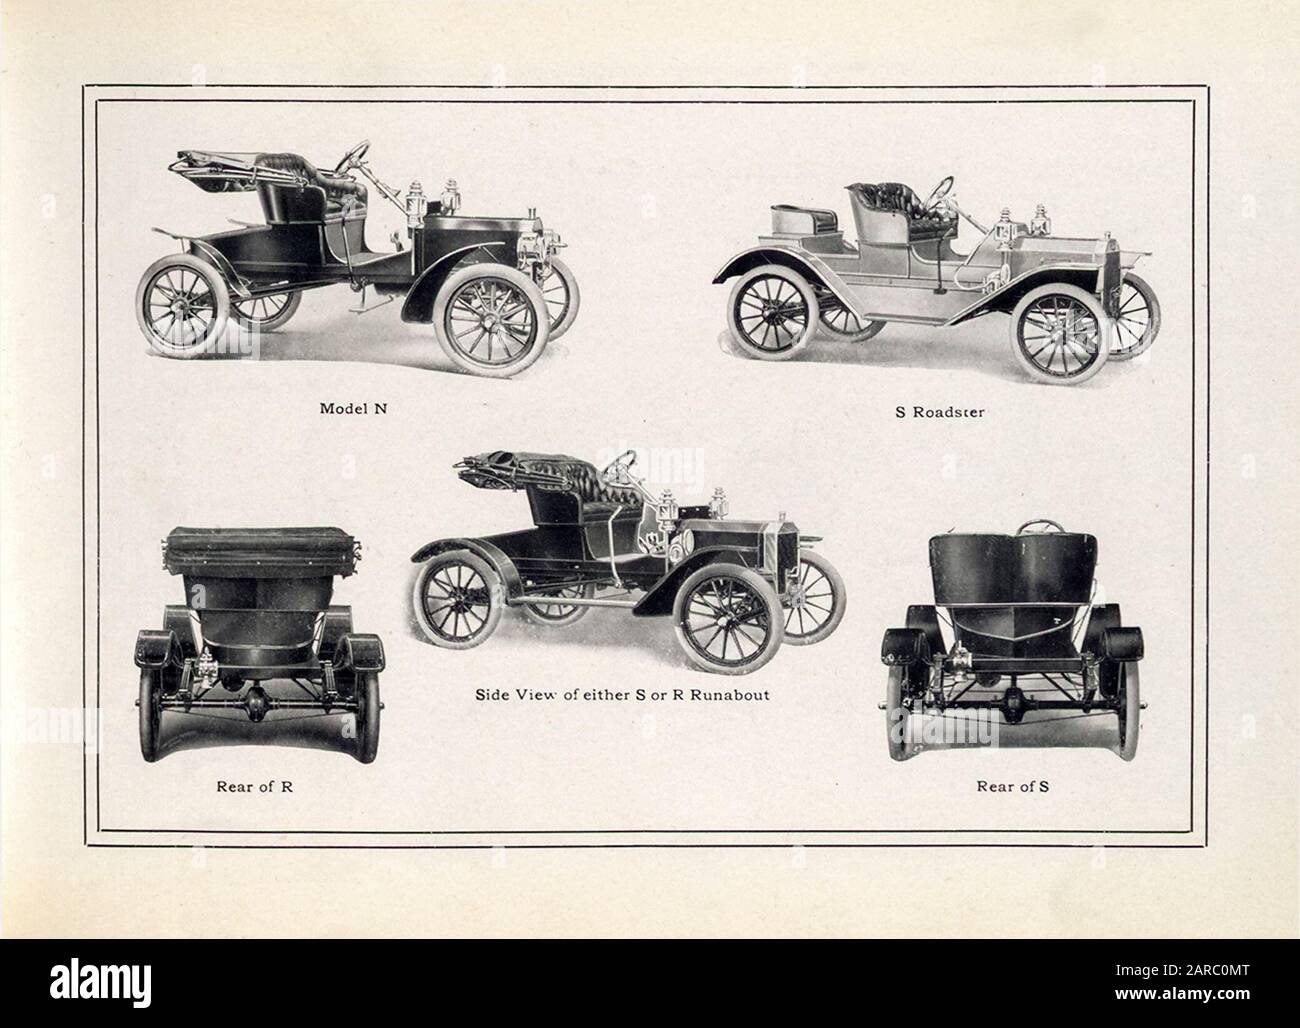 Ford Vintage Car, Model N, S Roadster, Runabout, illustration circa 1909 Stock Photo